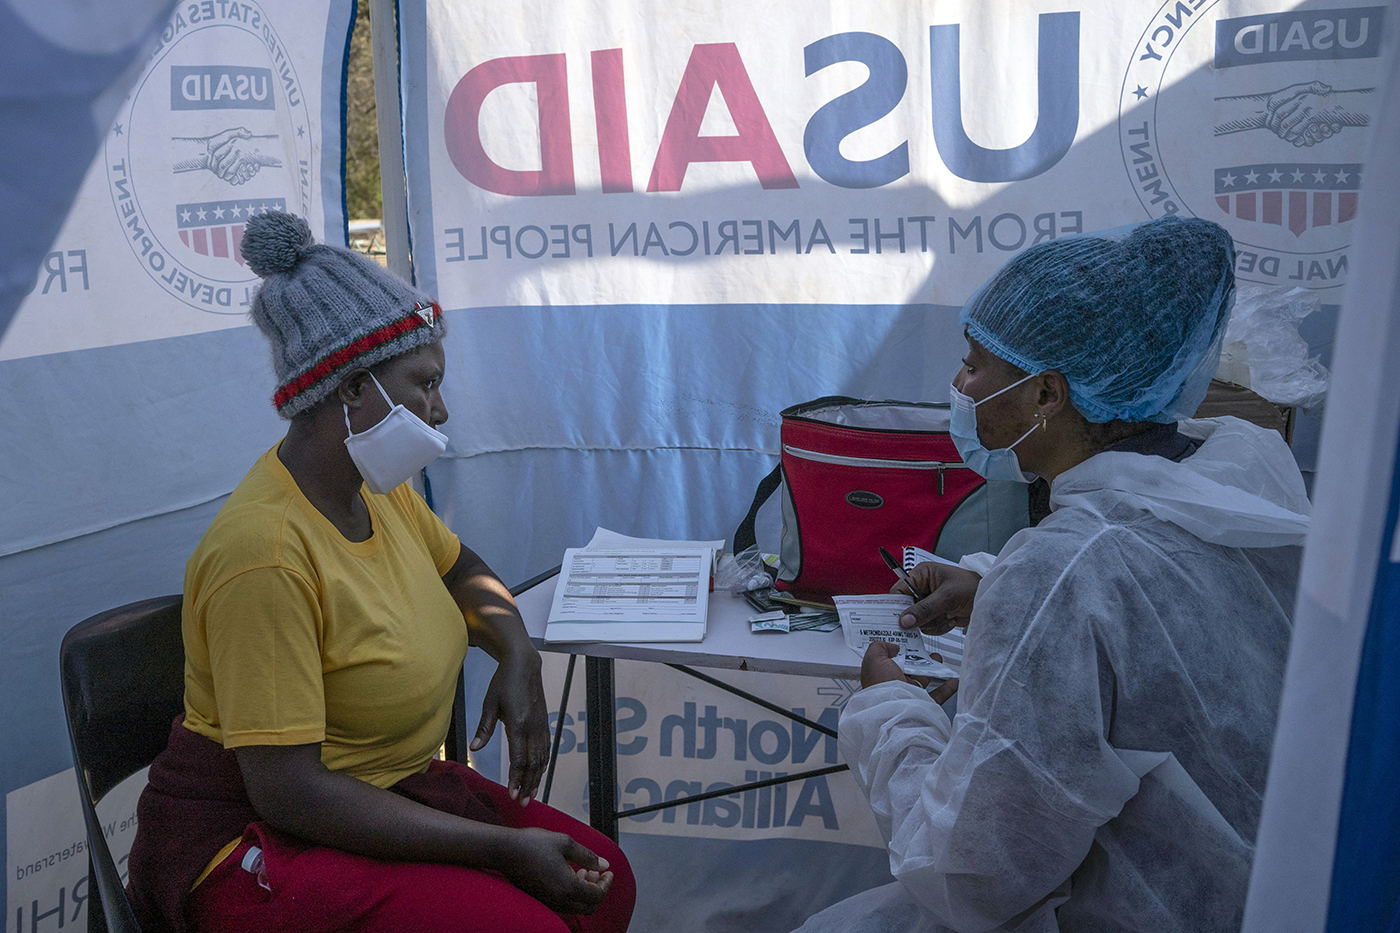 Nomautanda Siduna and HIV-positive patient pictured sitting at a mobile clinic in South Africa.